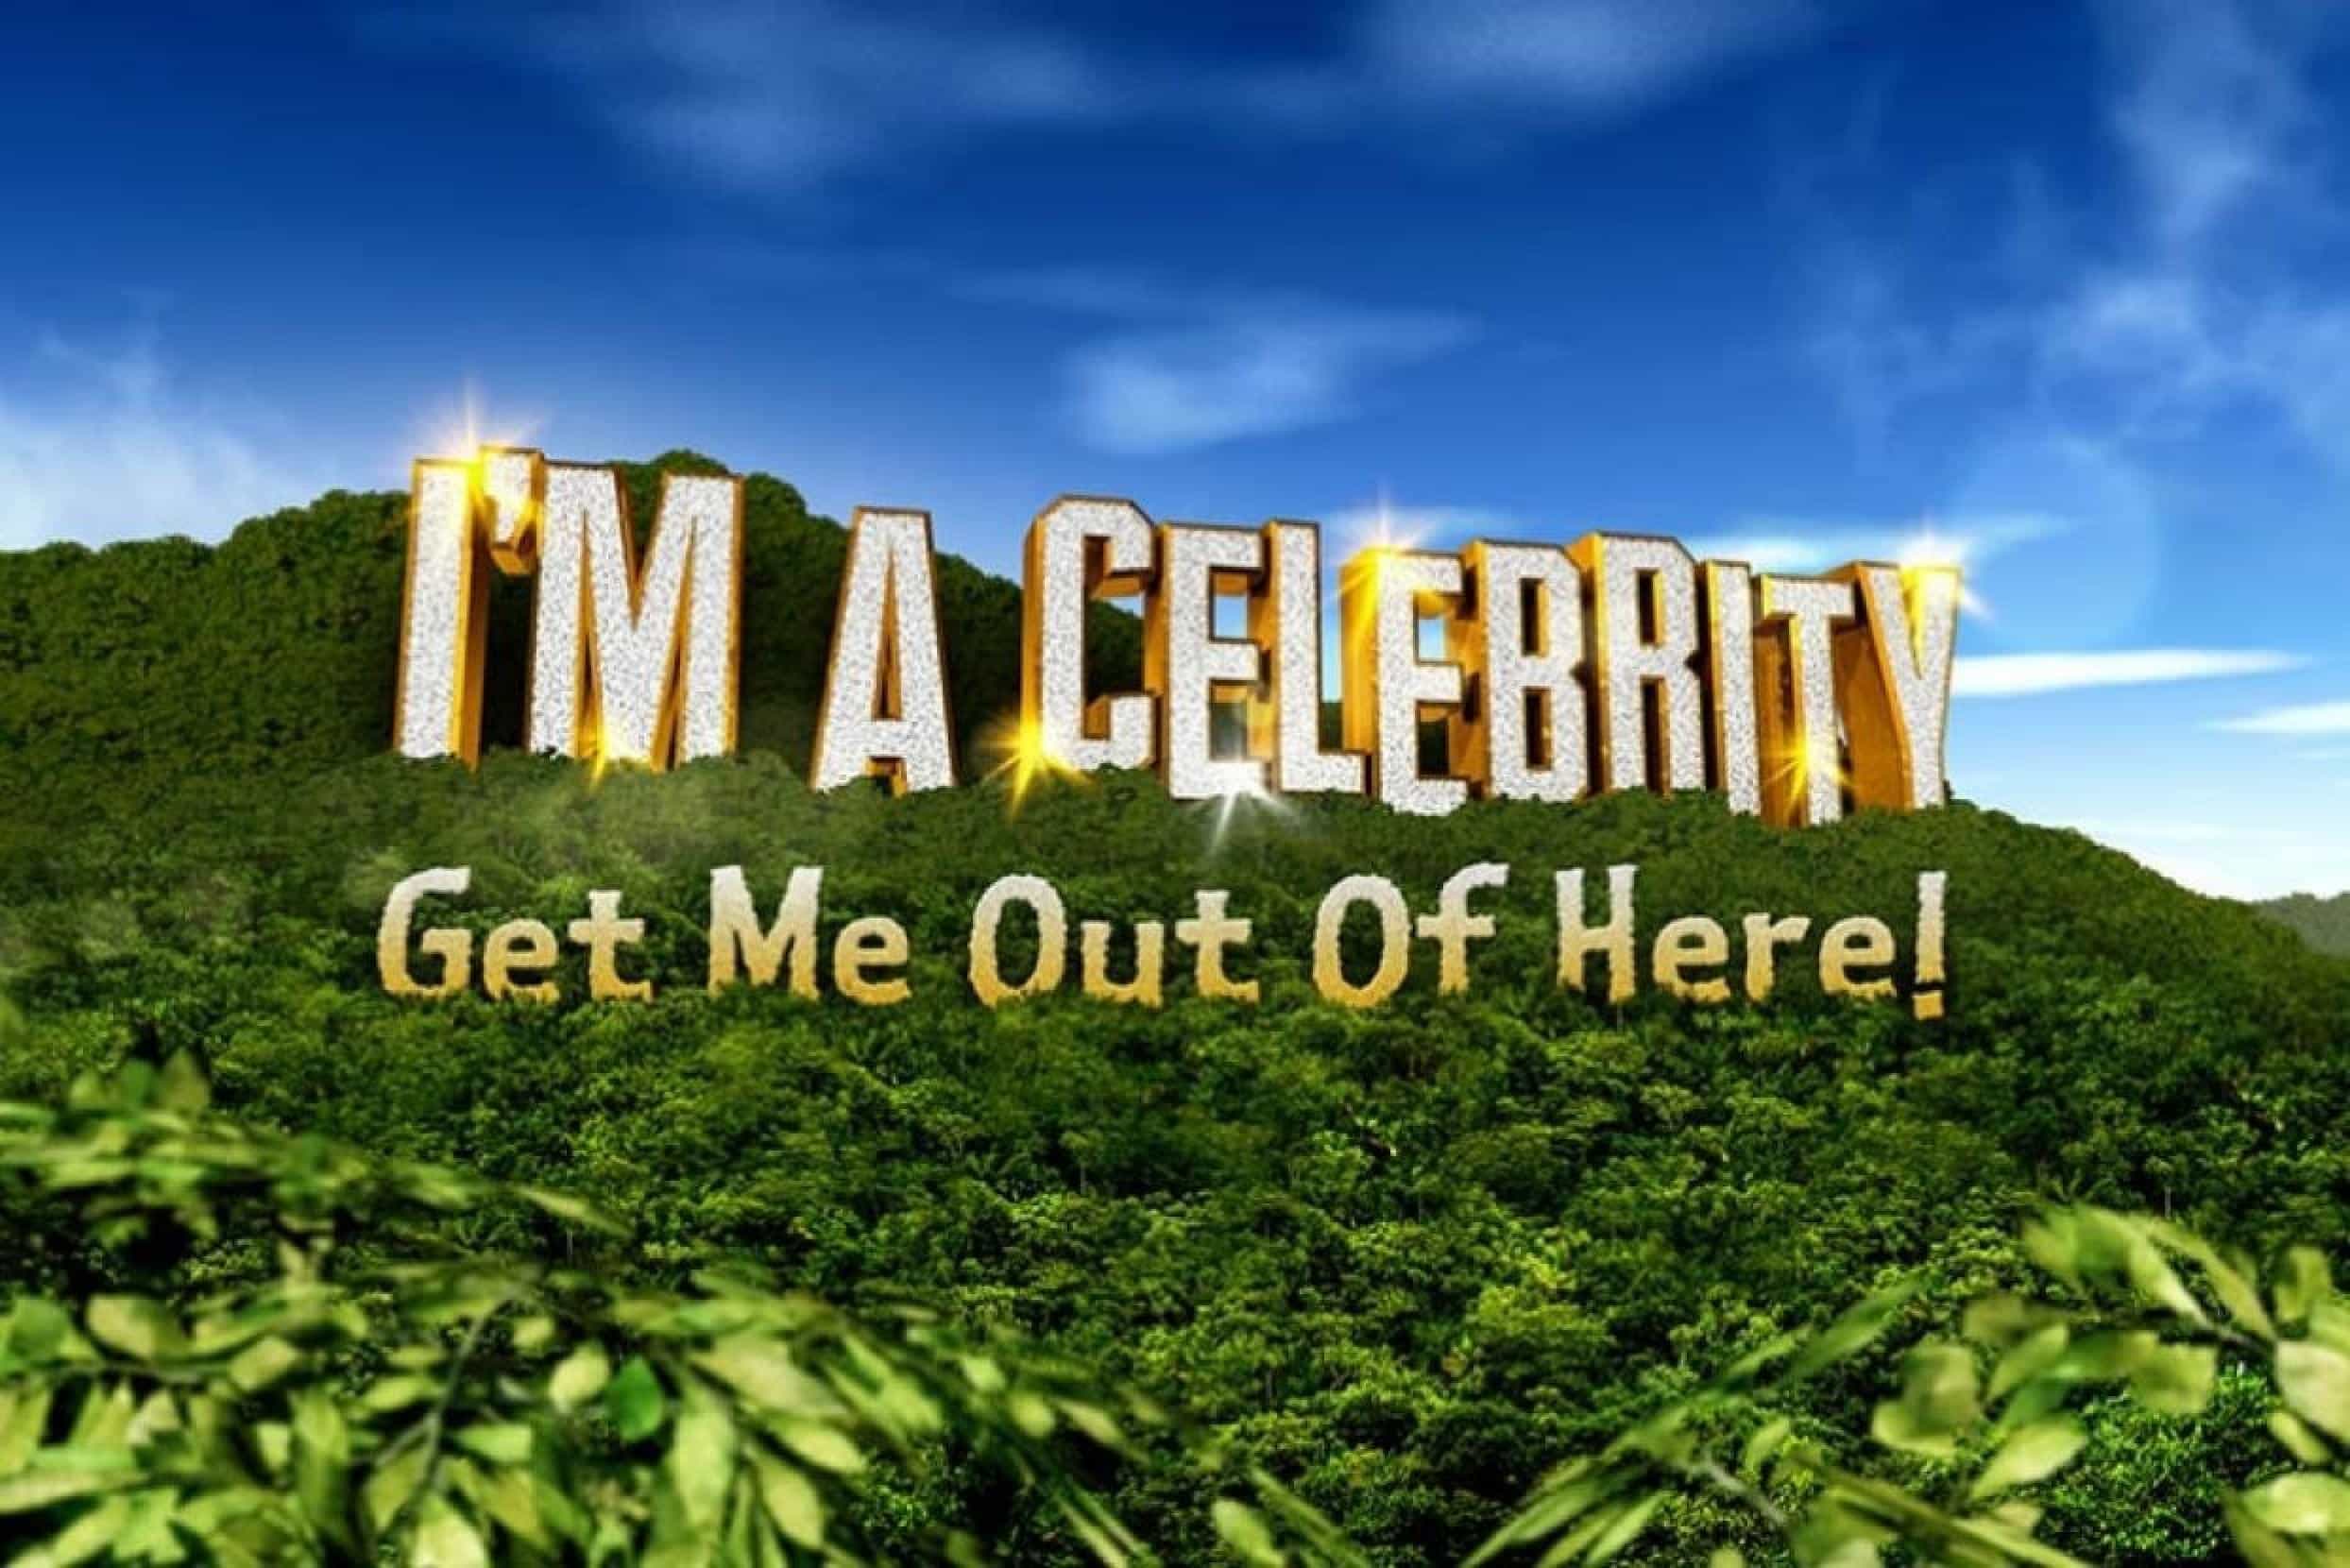 ITV’s I’m a Celebrity Get Me Out of Here logo.